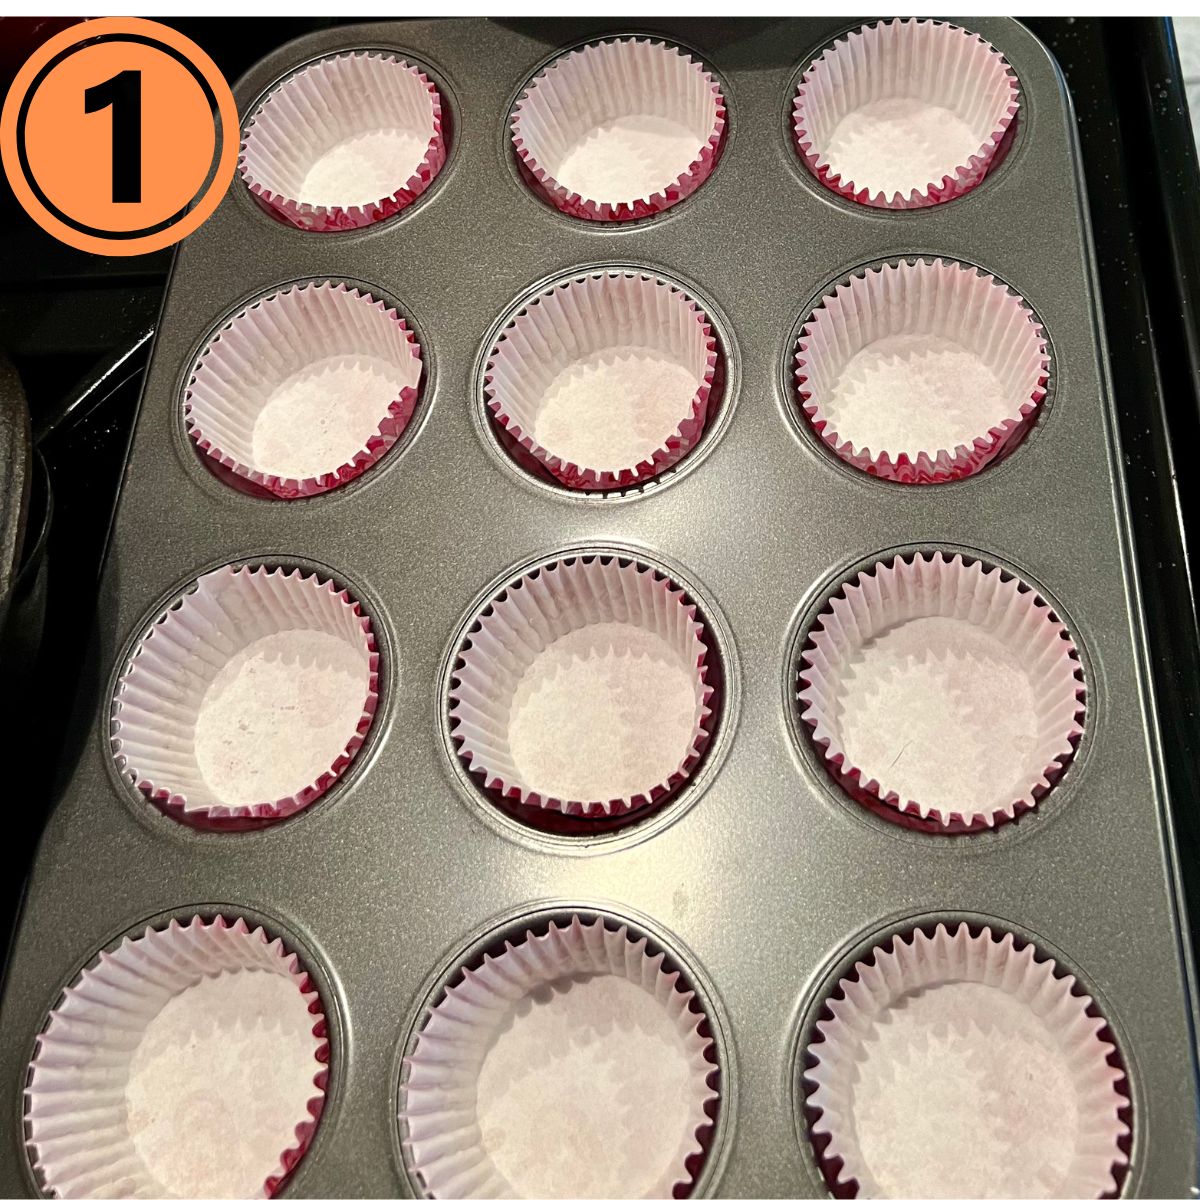 A muffin pan with paper liners